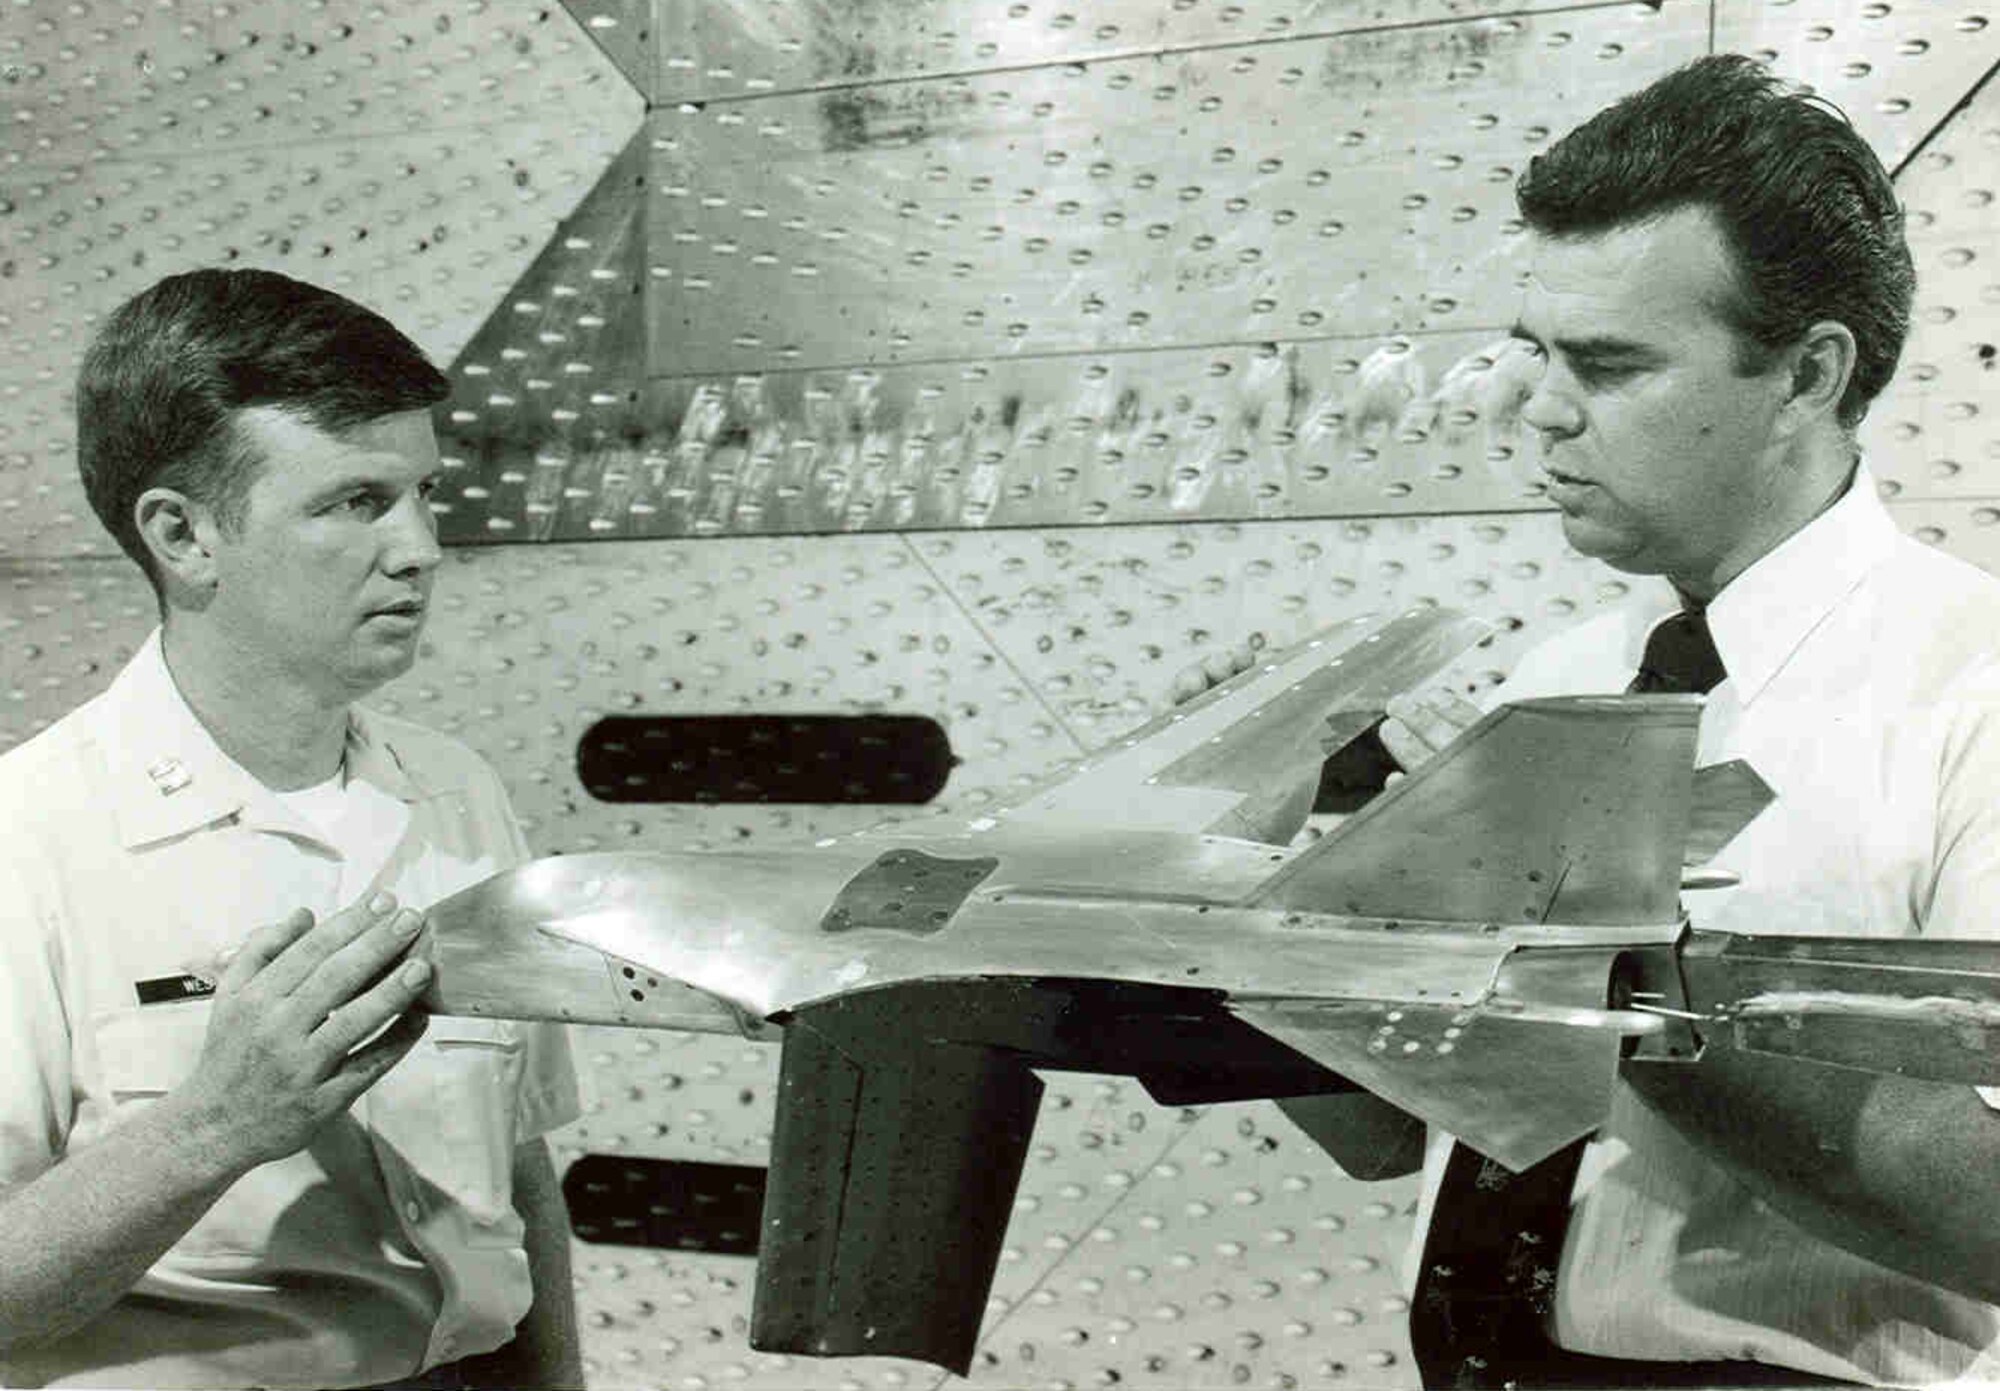 Dale Bradley, right, and Capt. Walter West examine a scale model of an aircraft fitted with a mission adaptive wing in the early 1980s at Arnold Air Force Base, Tenn. The mission adaptive wing concept involved varying the wing’s camber, which refers to the convexity of the airfoil, to assess impact on aerodynamic performance. This was among numerous projects with which Bradley was involved during his 33-year career at Arnold. (U.S. Air Force photo)